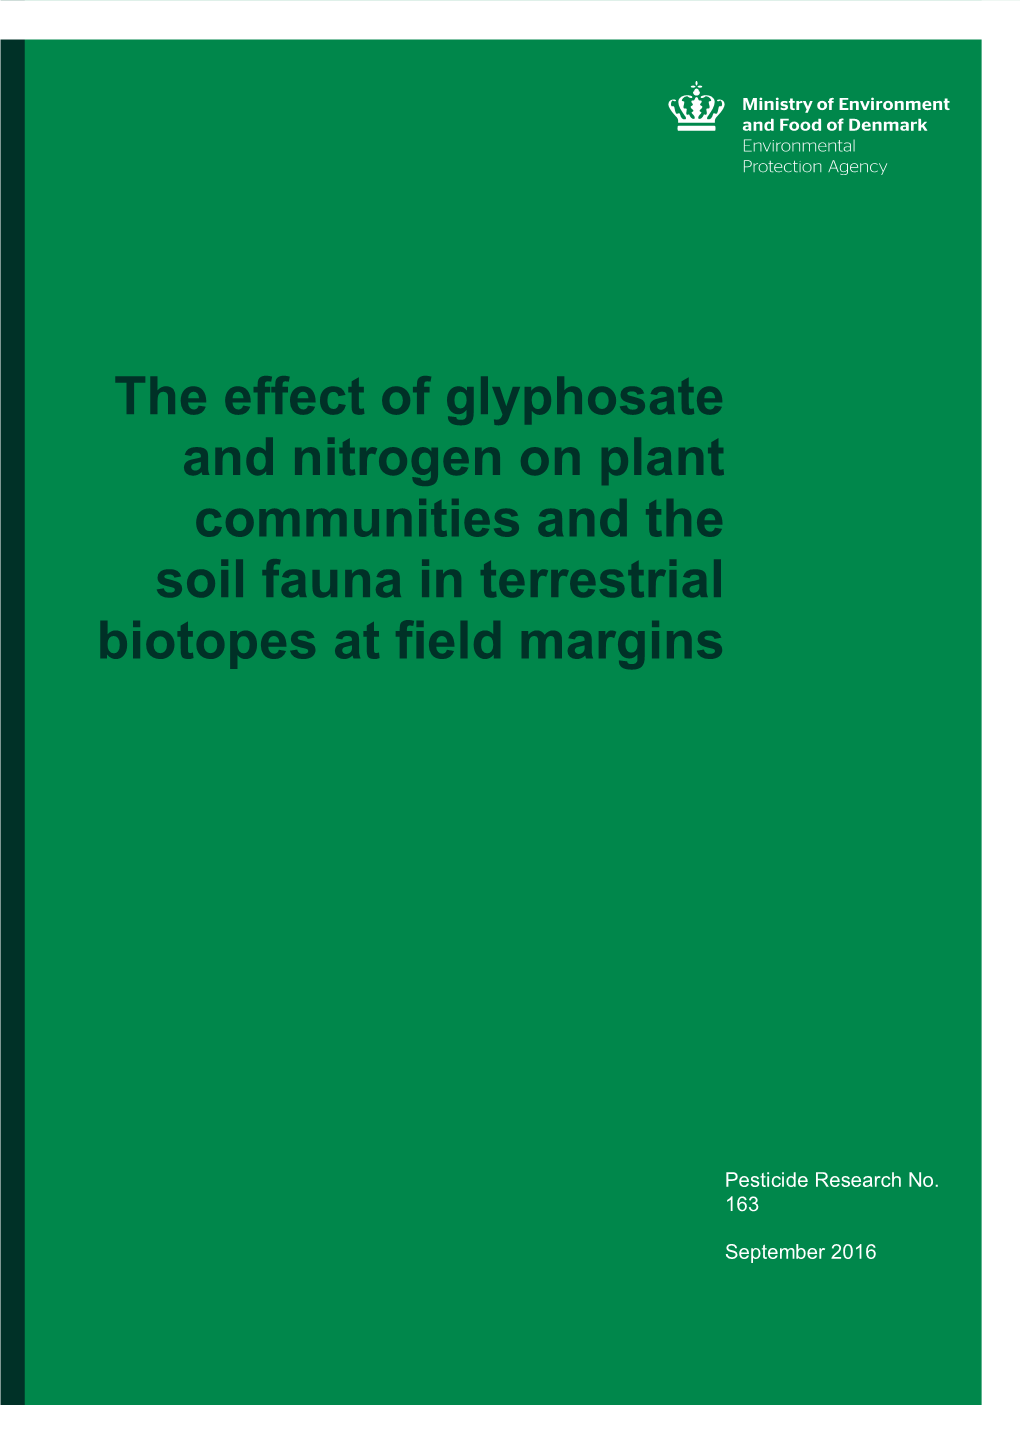 The Effect of Glyphosate and Nitrogen on Plant Communities and the Soil Fauna in Terrestrial Biotopes at Field Margins